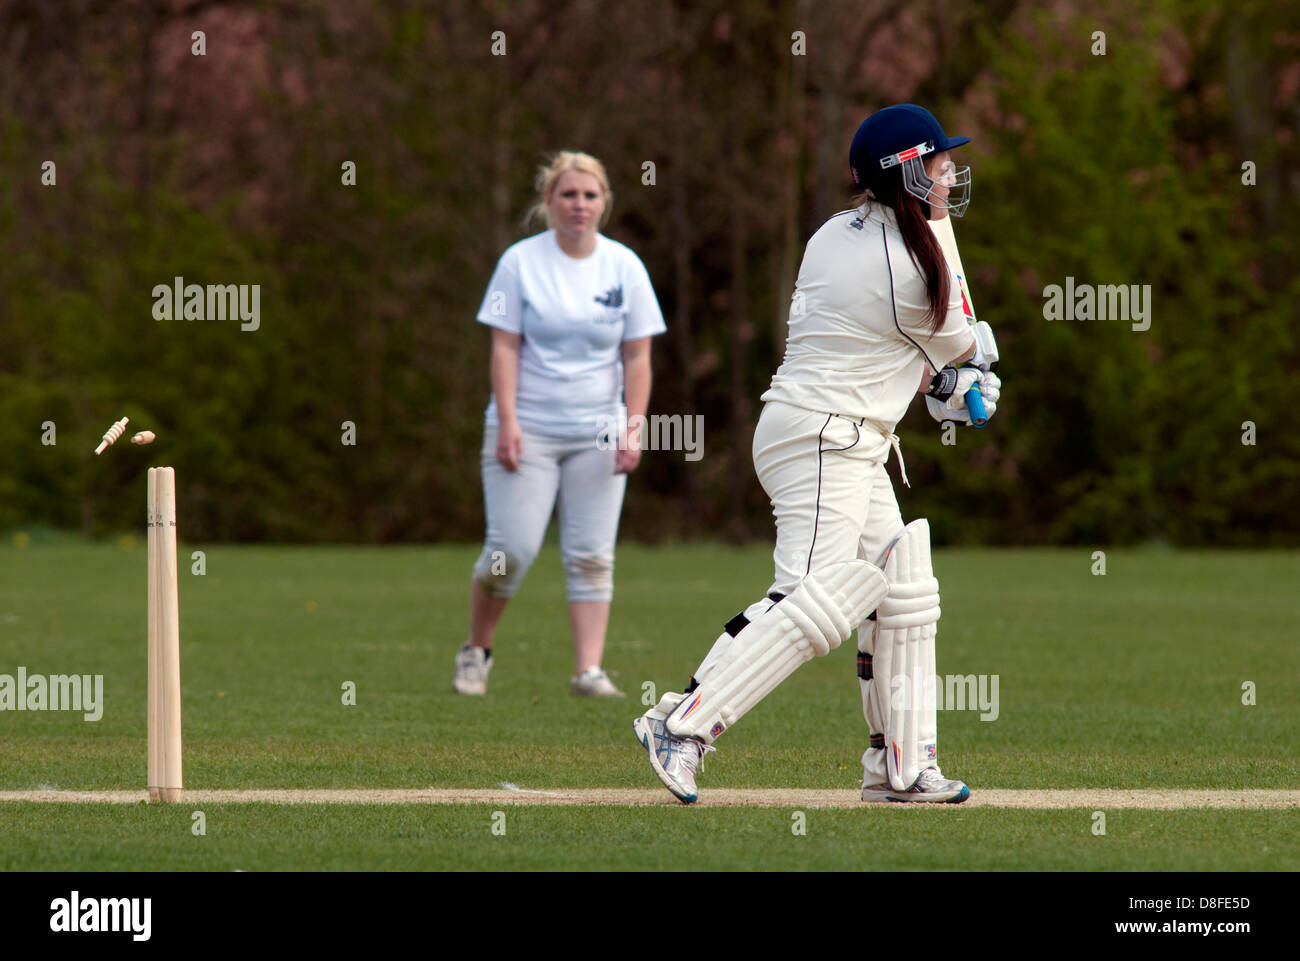 University sport, ladies cricket, batsman bowled out, bails in air. Stock Photo